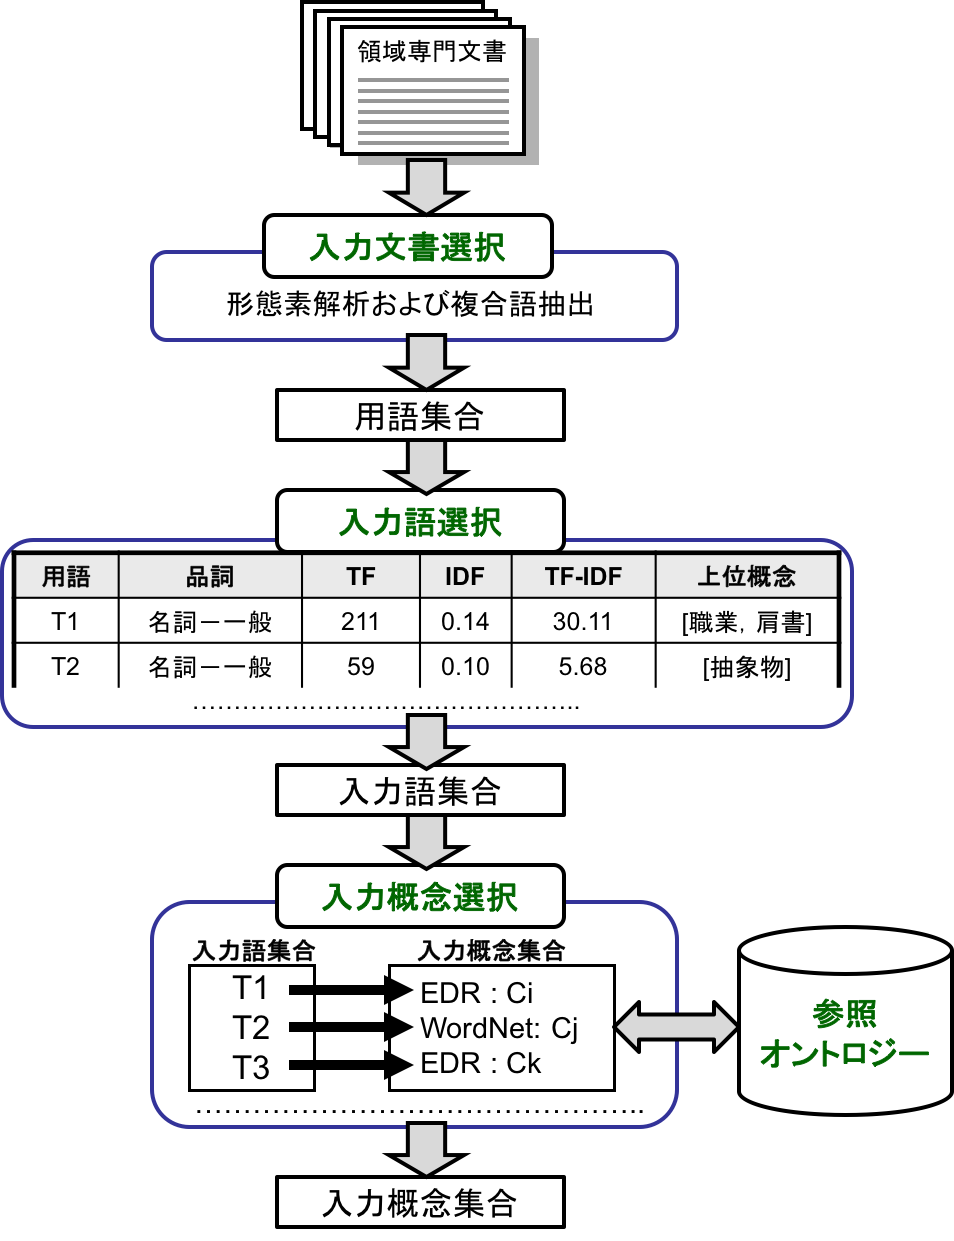 System flow of Input Module